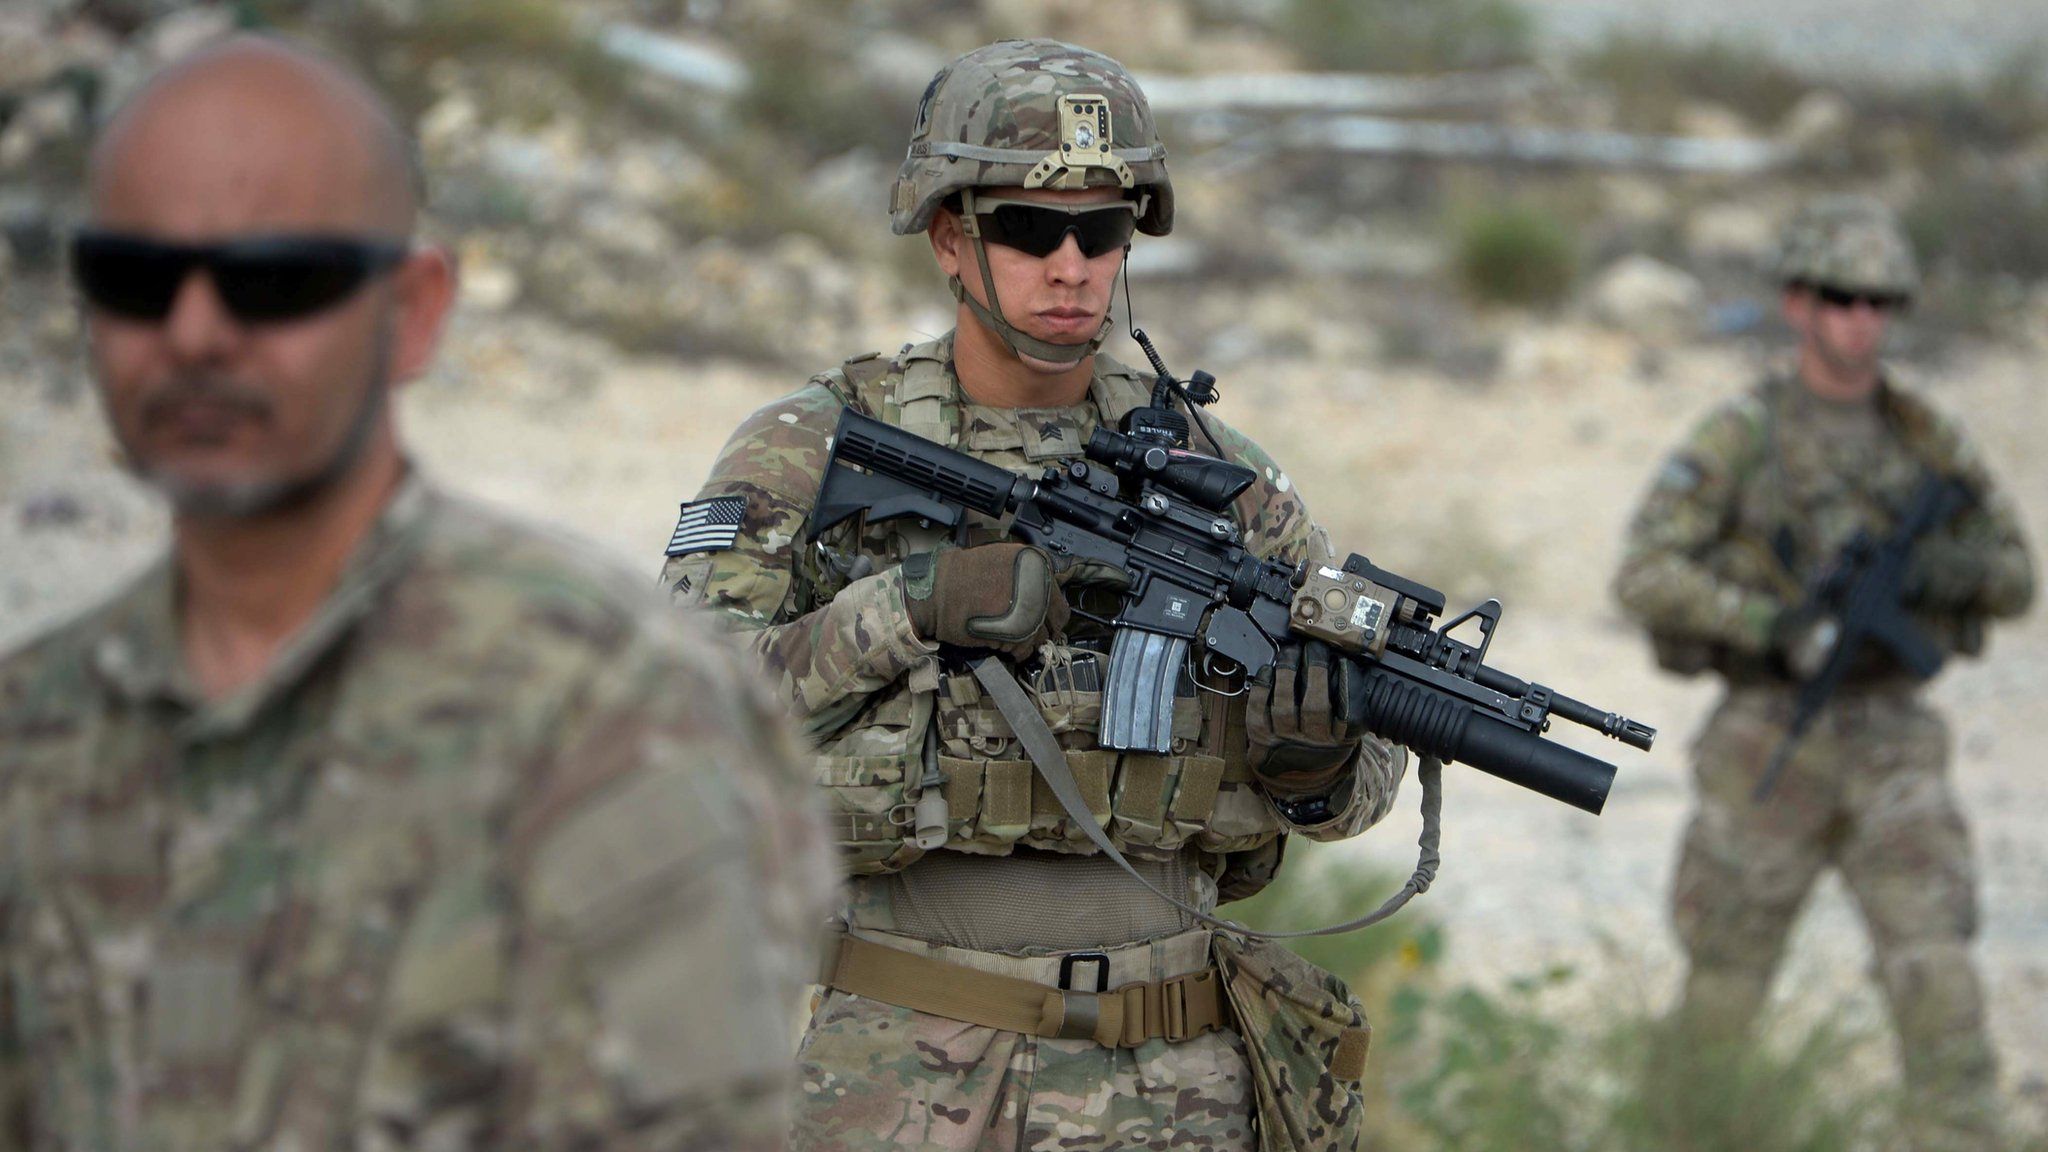 US soldiers pictured in Afghanistan